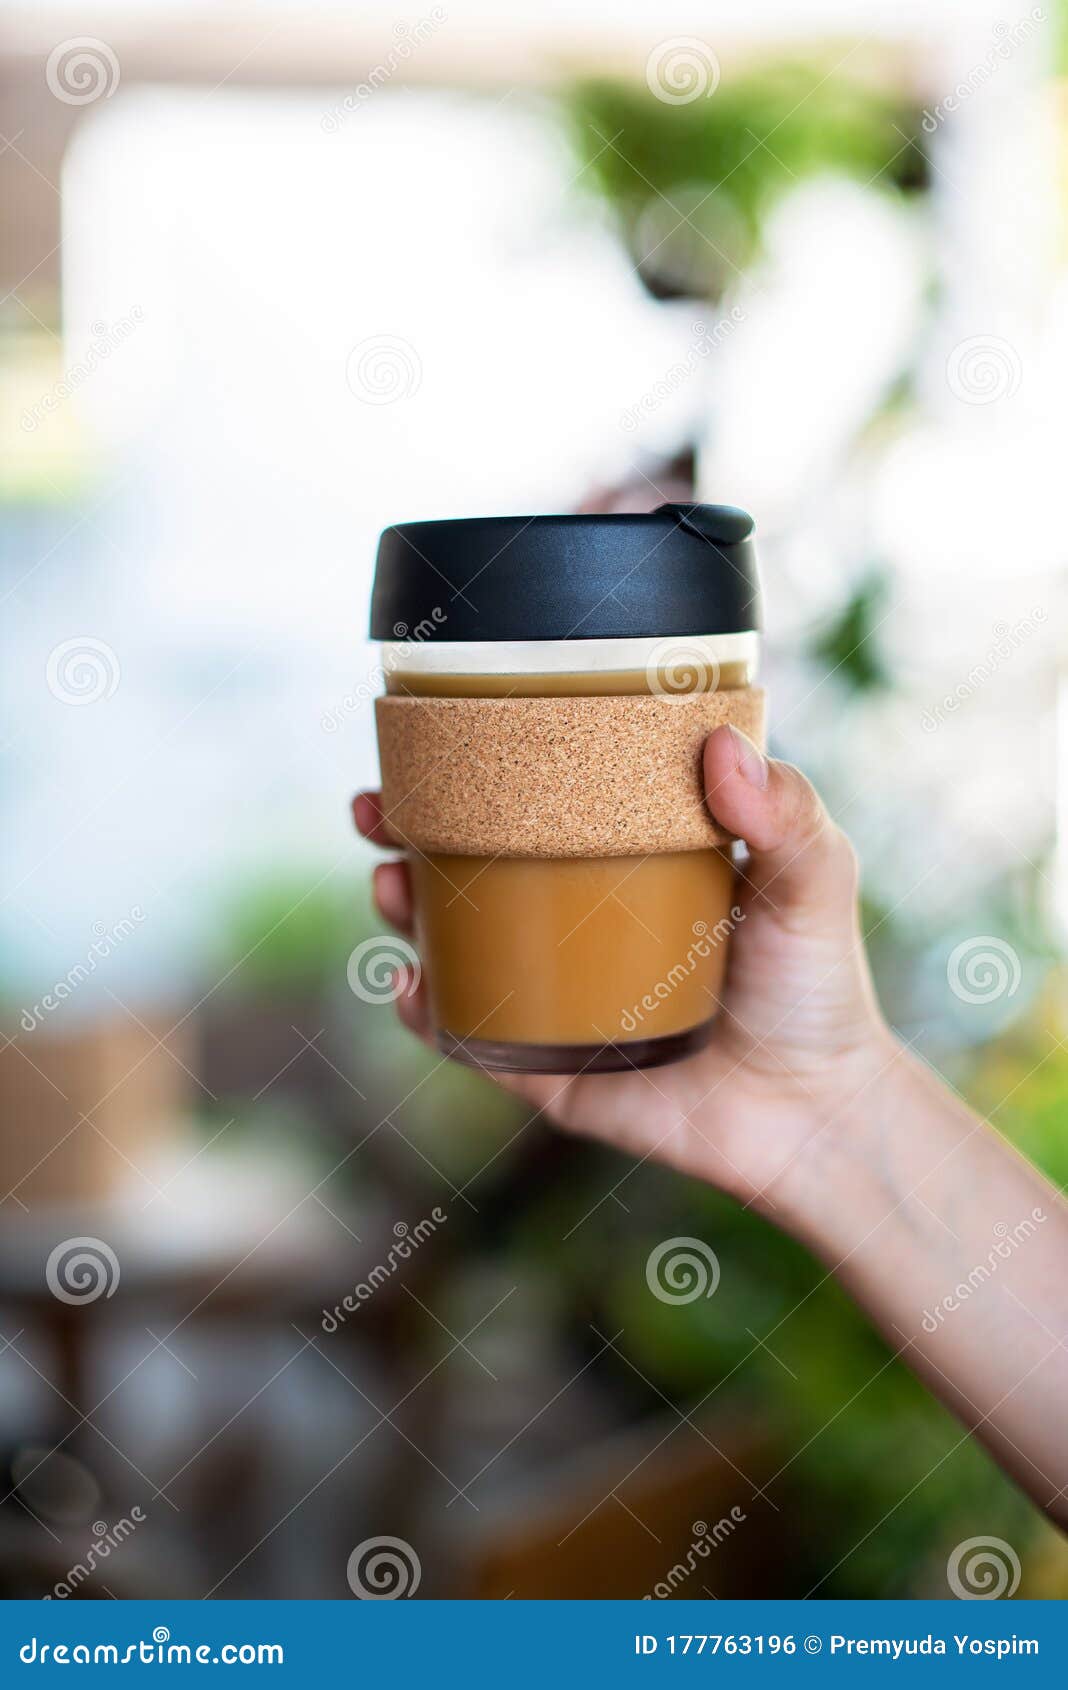 female hands holding reusable coffee cup,